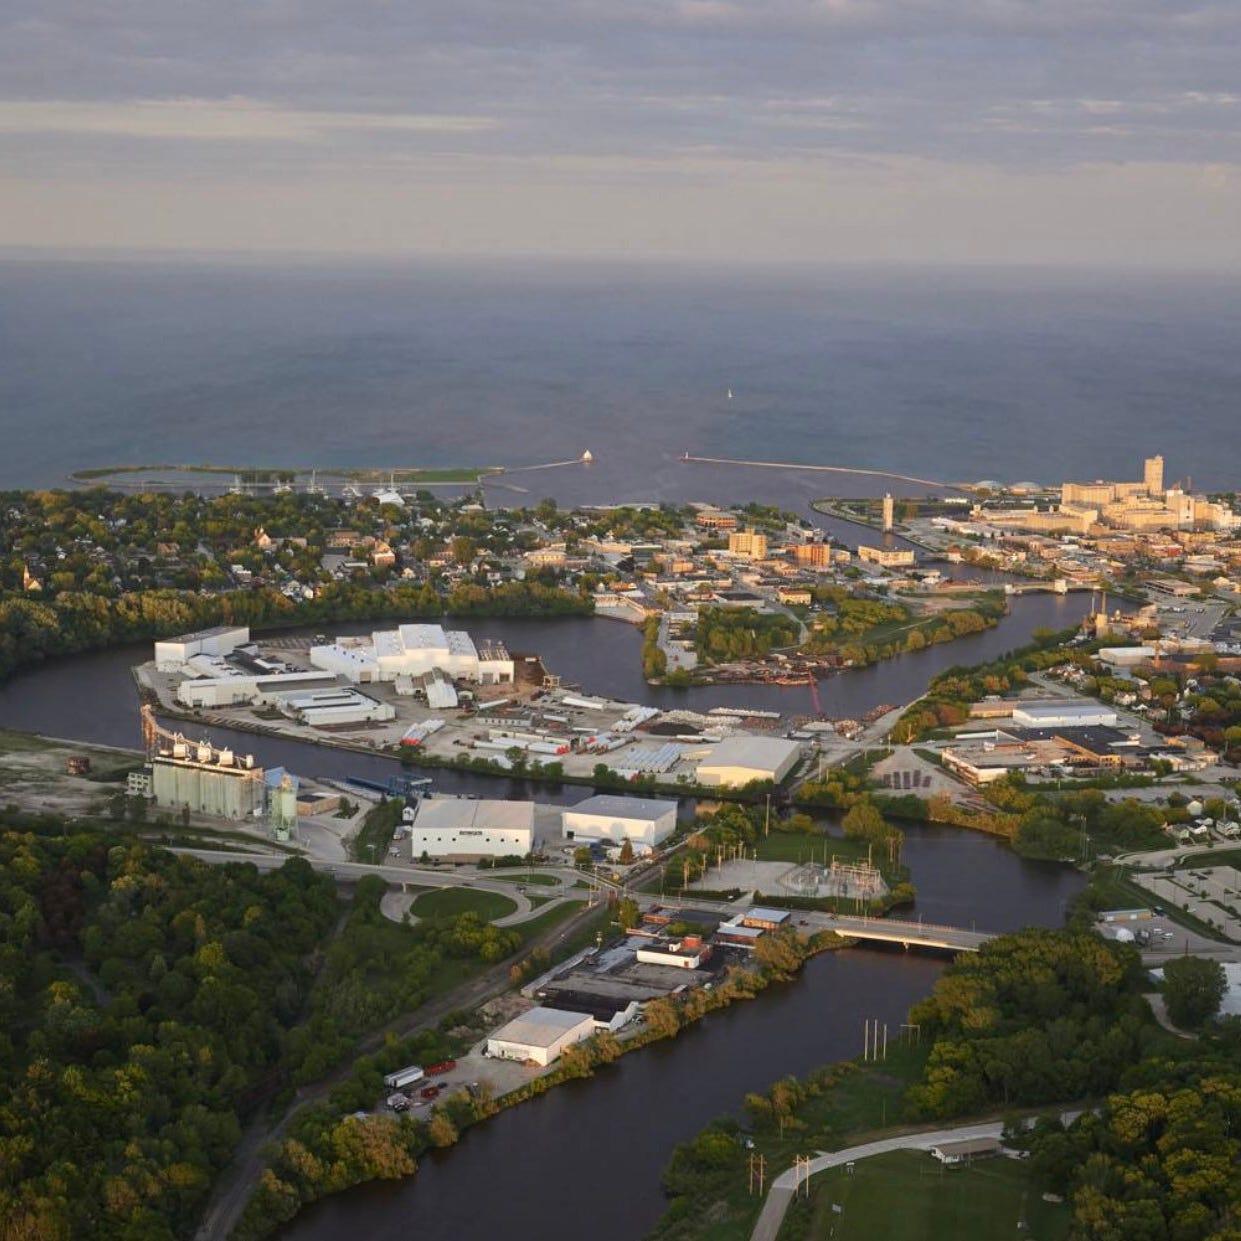 City of Manitowoc view from the sky.